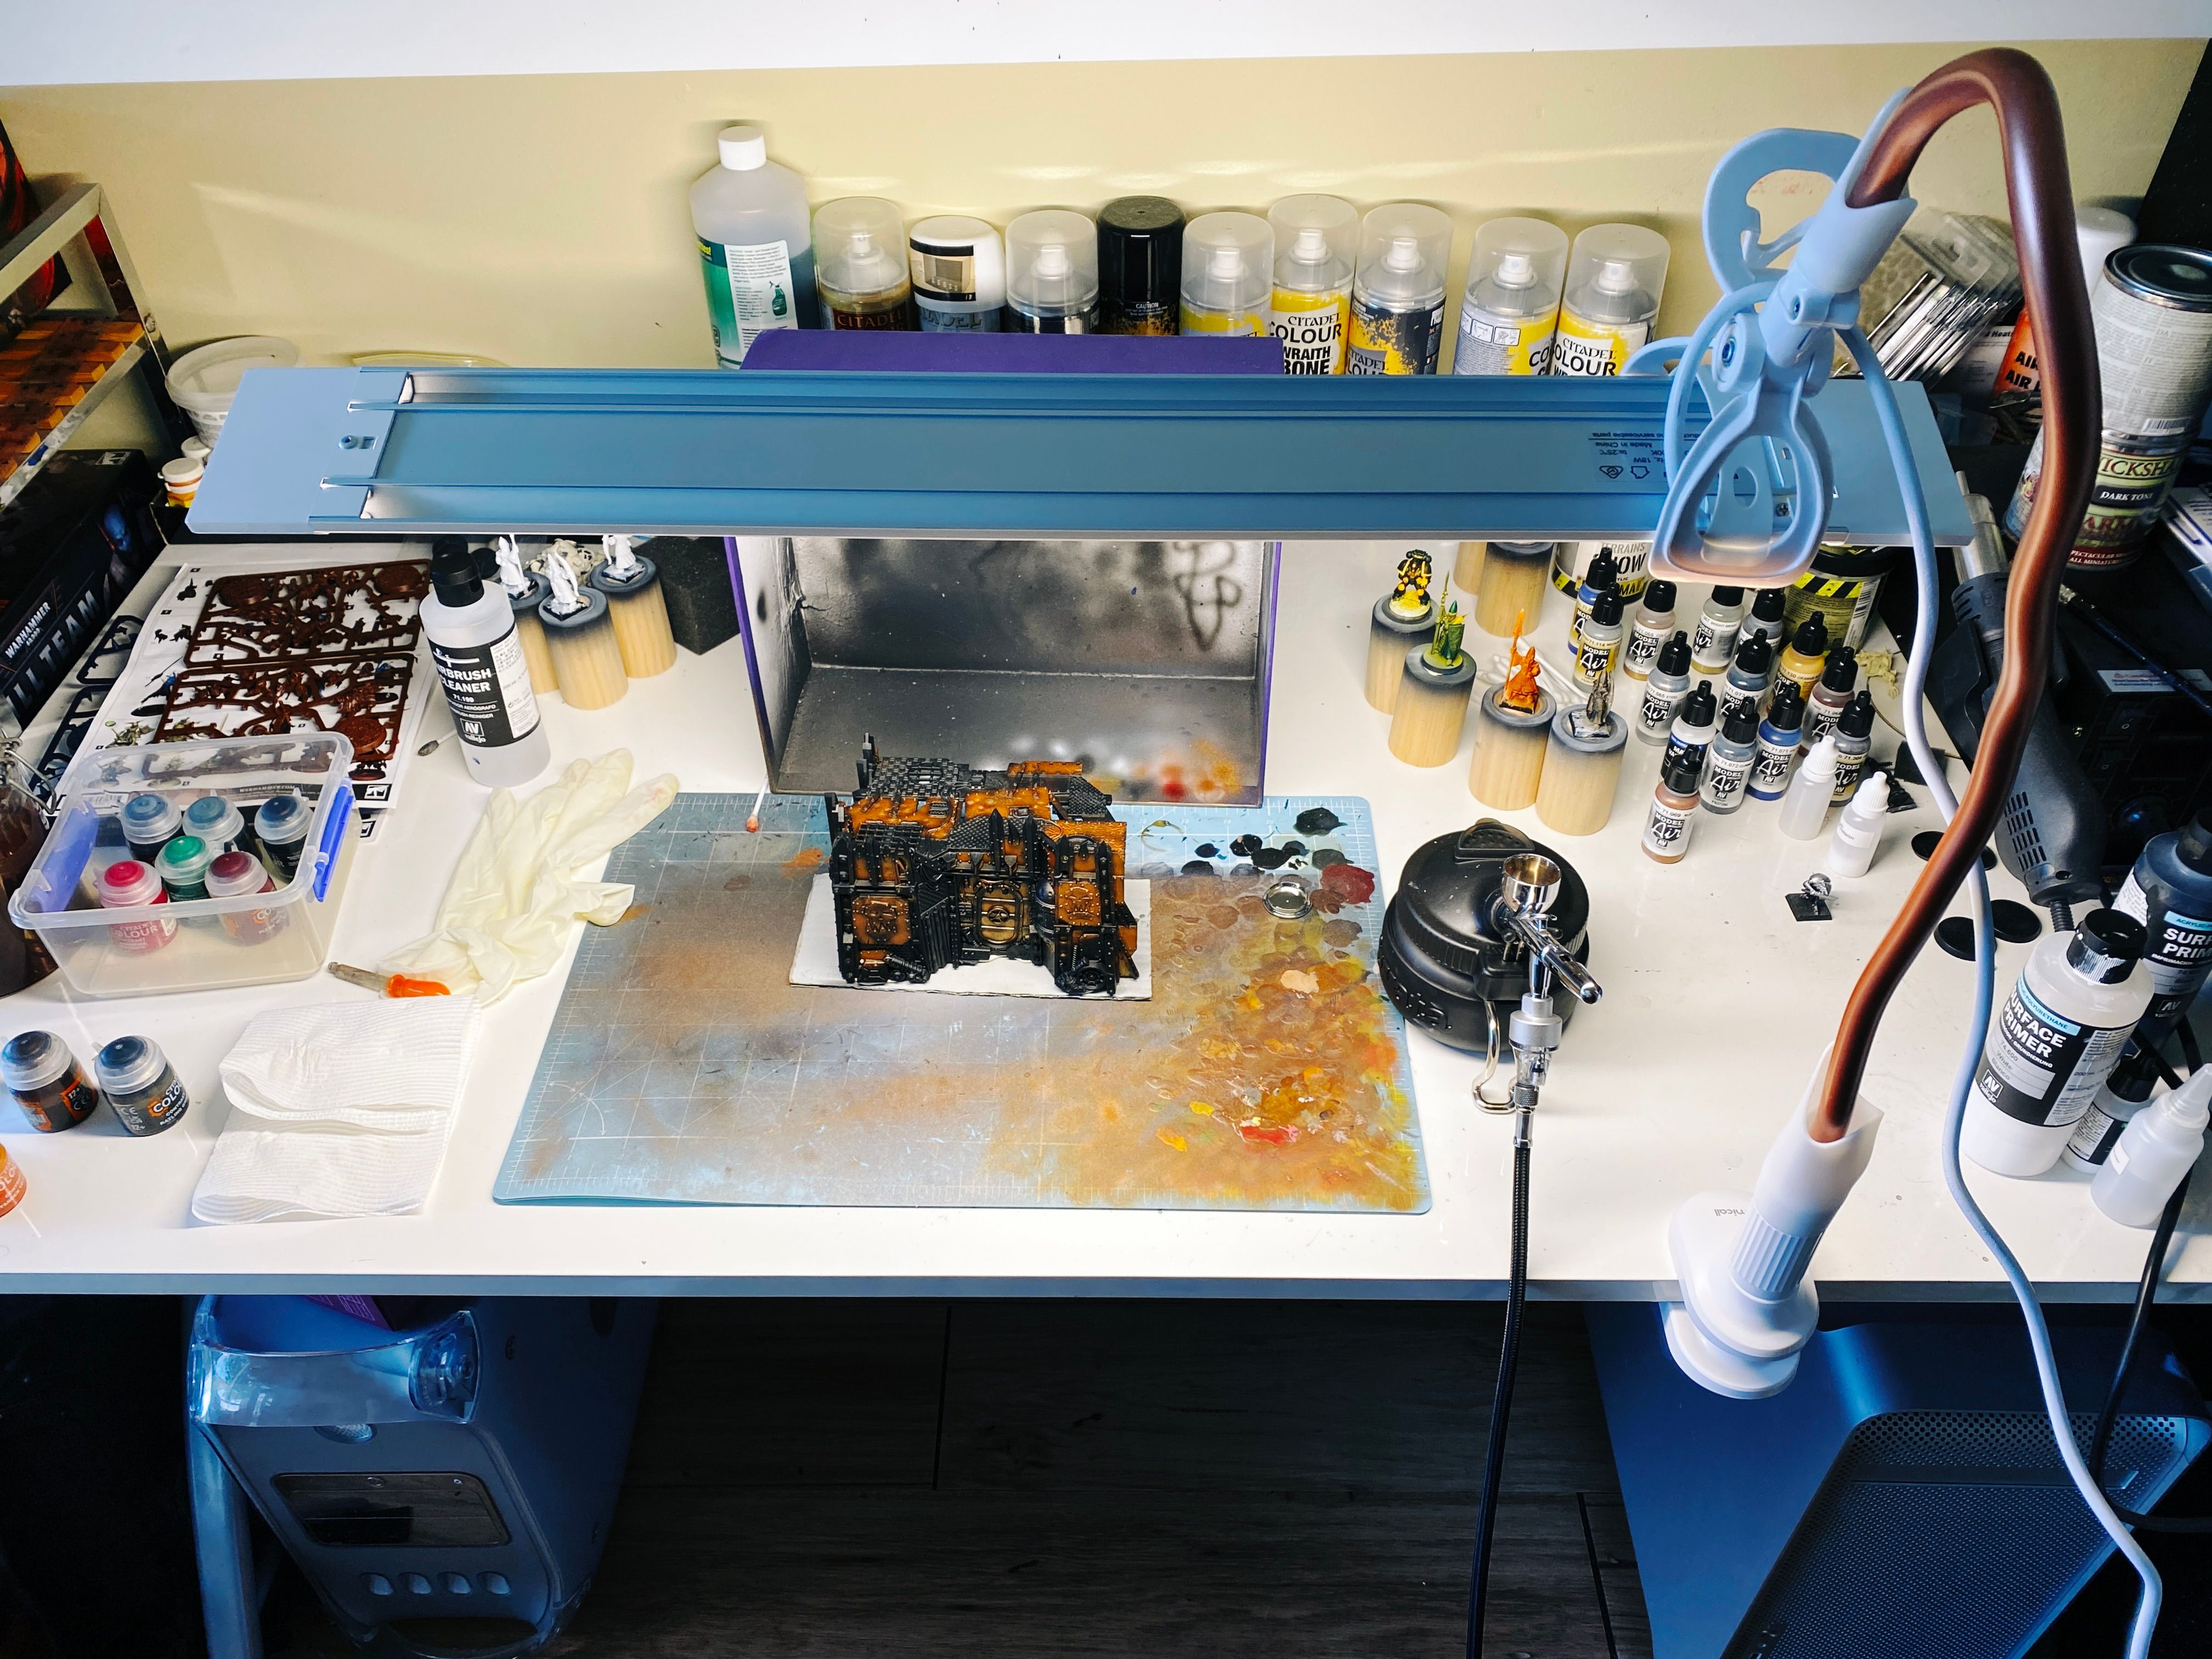 A photo of a very messy desk with an airbrush sitting on it, a piece of junkyard-looking terrain from Warhammer 40,000, all of which is being brightly lit from above by an long narrow LED light that's pointing downwards. The light is being held in place by a gooseneck phone holder that's attached to the side of the desk.